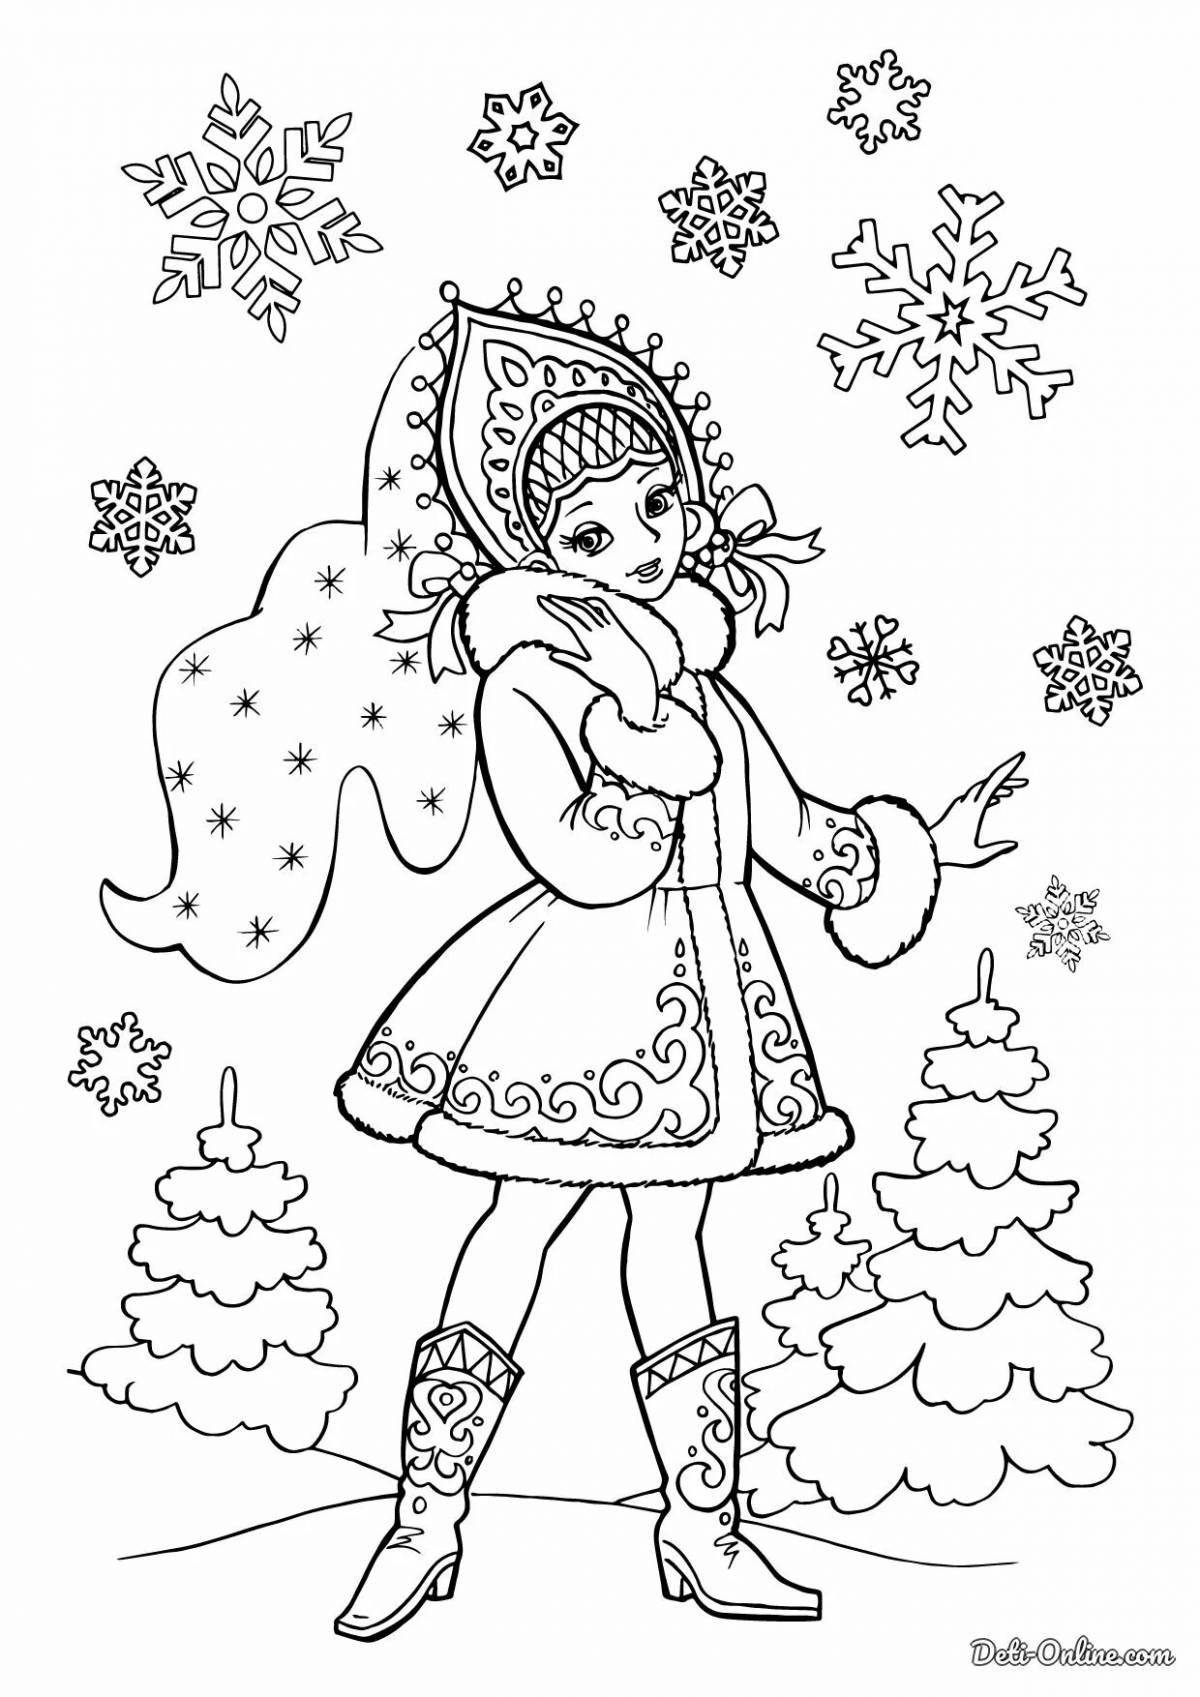 Exquisite Christmas coloring book for 6 year old girls